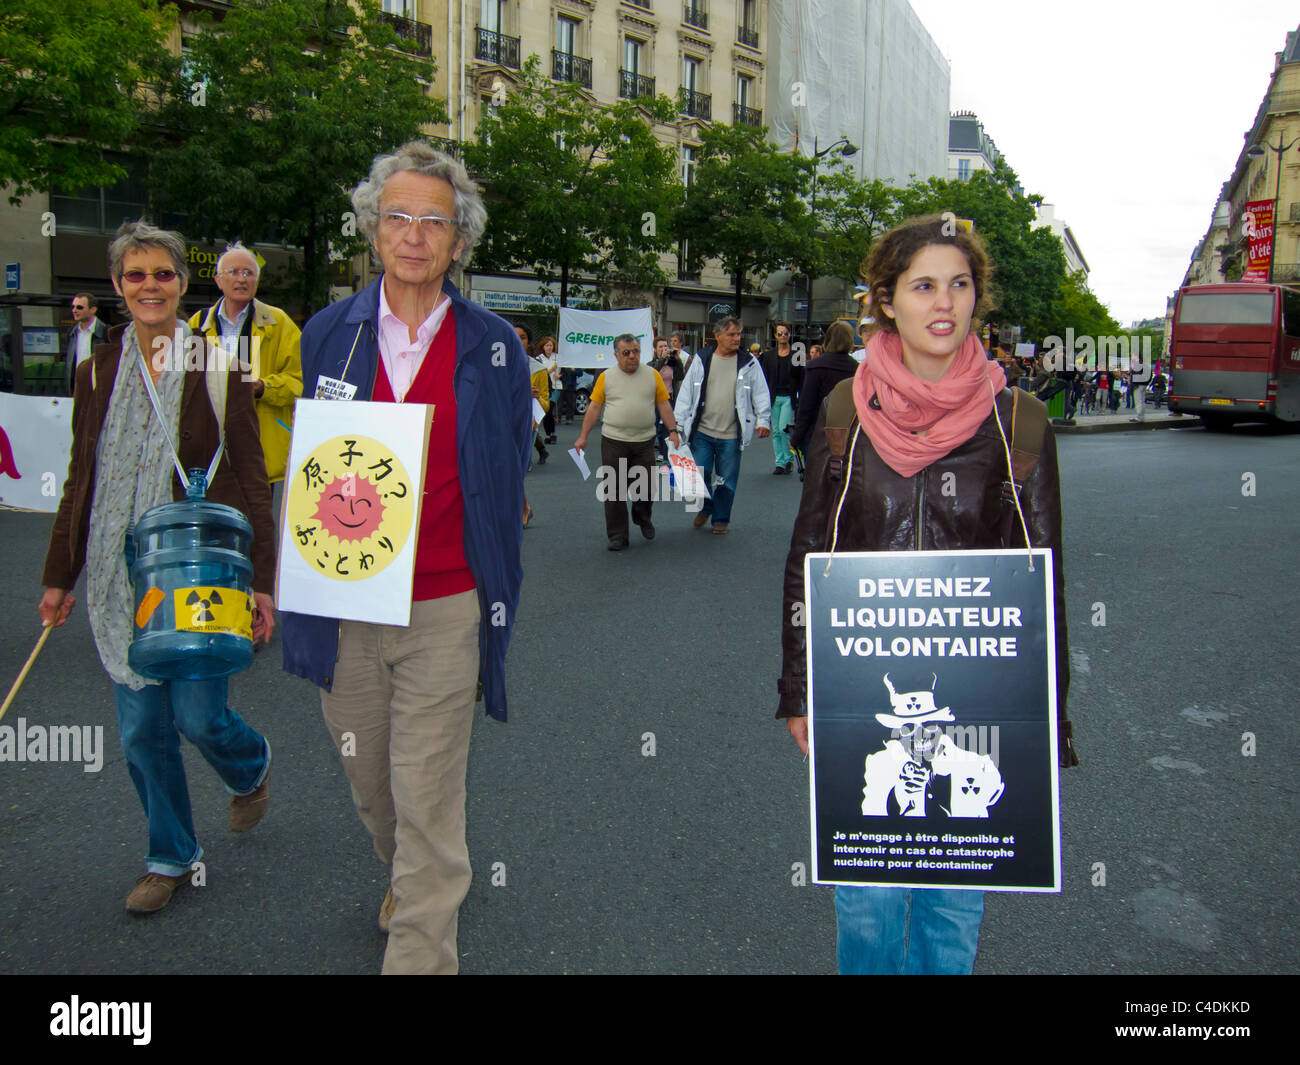 Paris, France, French Demonstration Against Nuclear Power, People Marching with Signs on Street, volunteer work man, nuclear energy protest Stock Photo